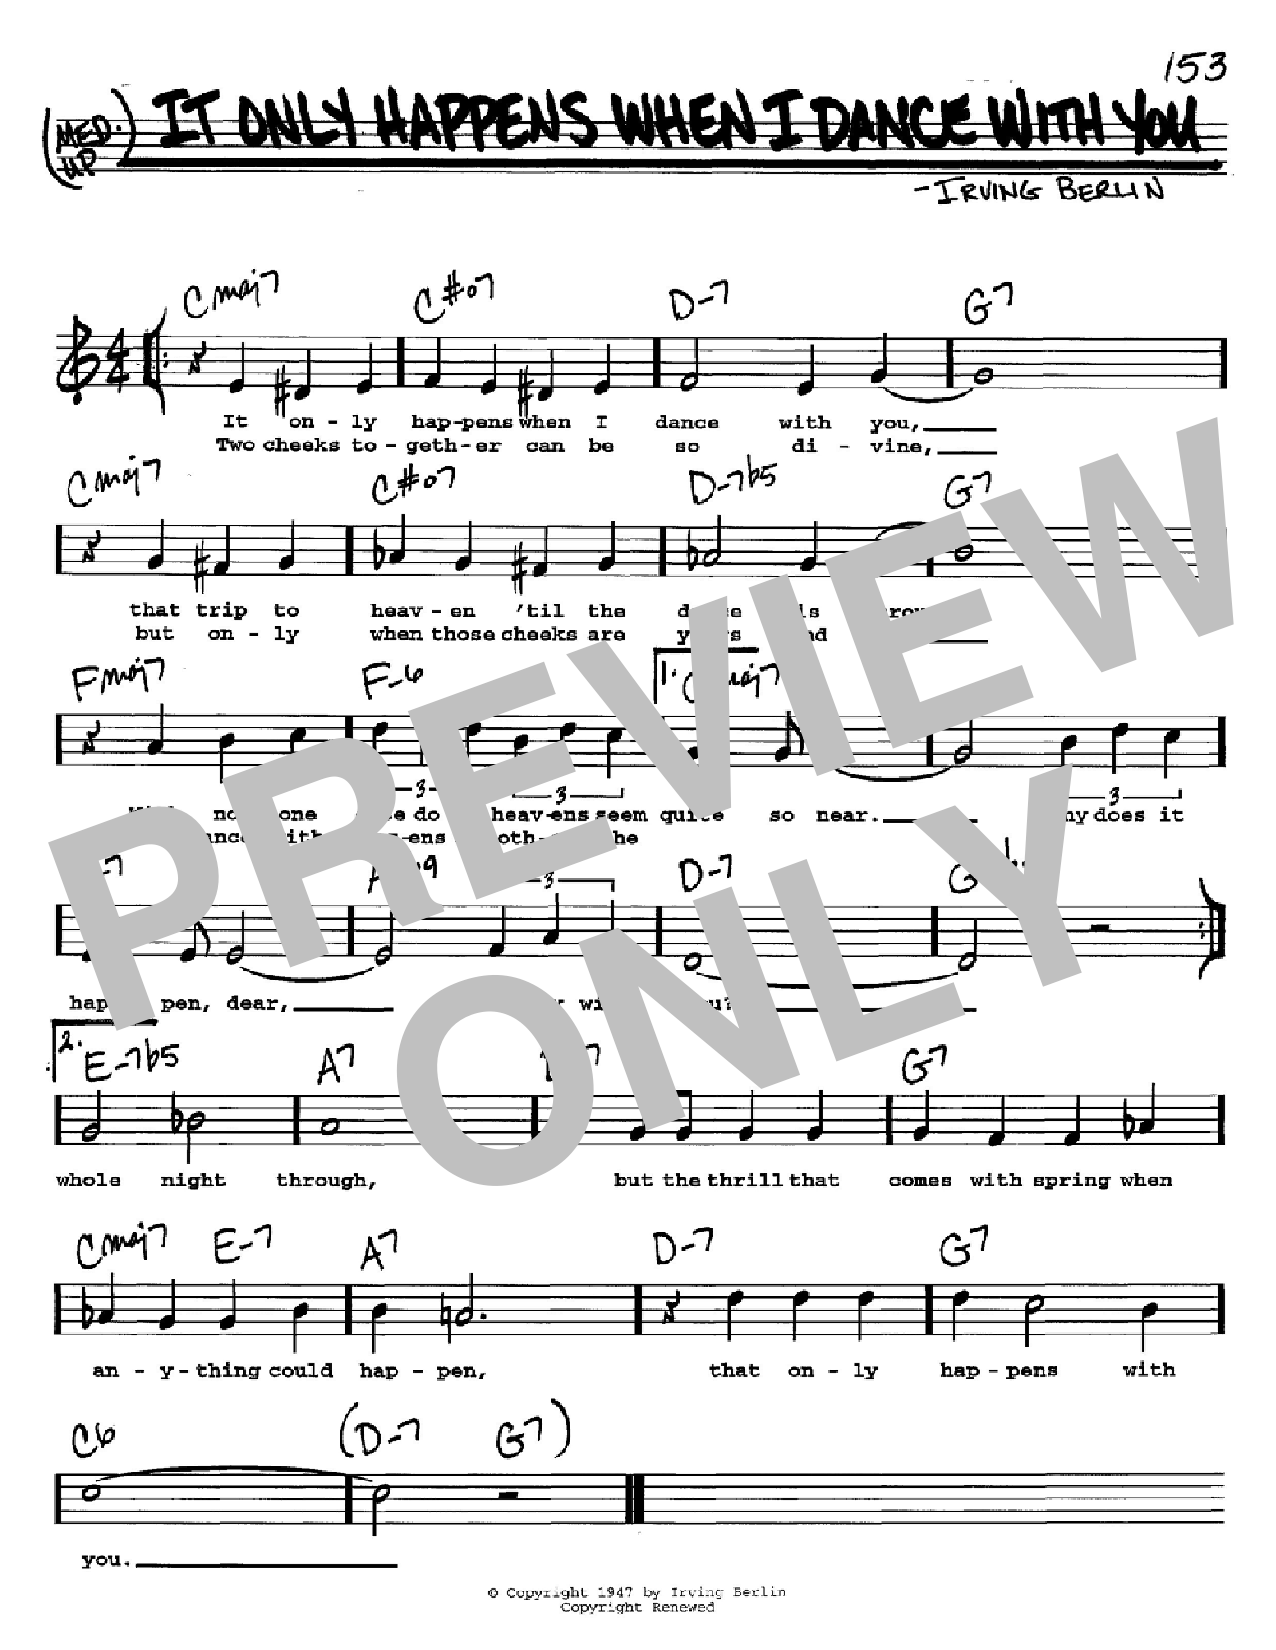 Download Irving Berlin It Only Happens When I Dance With You Sheet Music